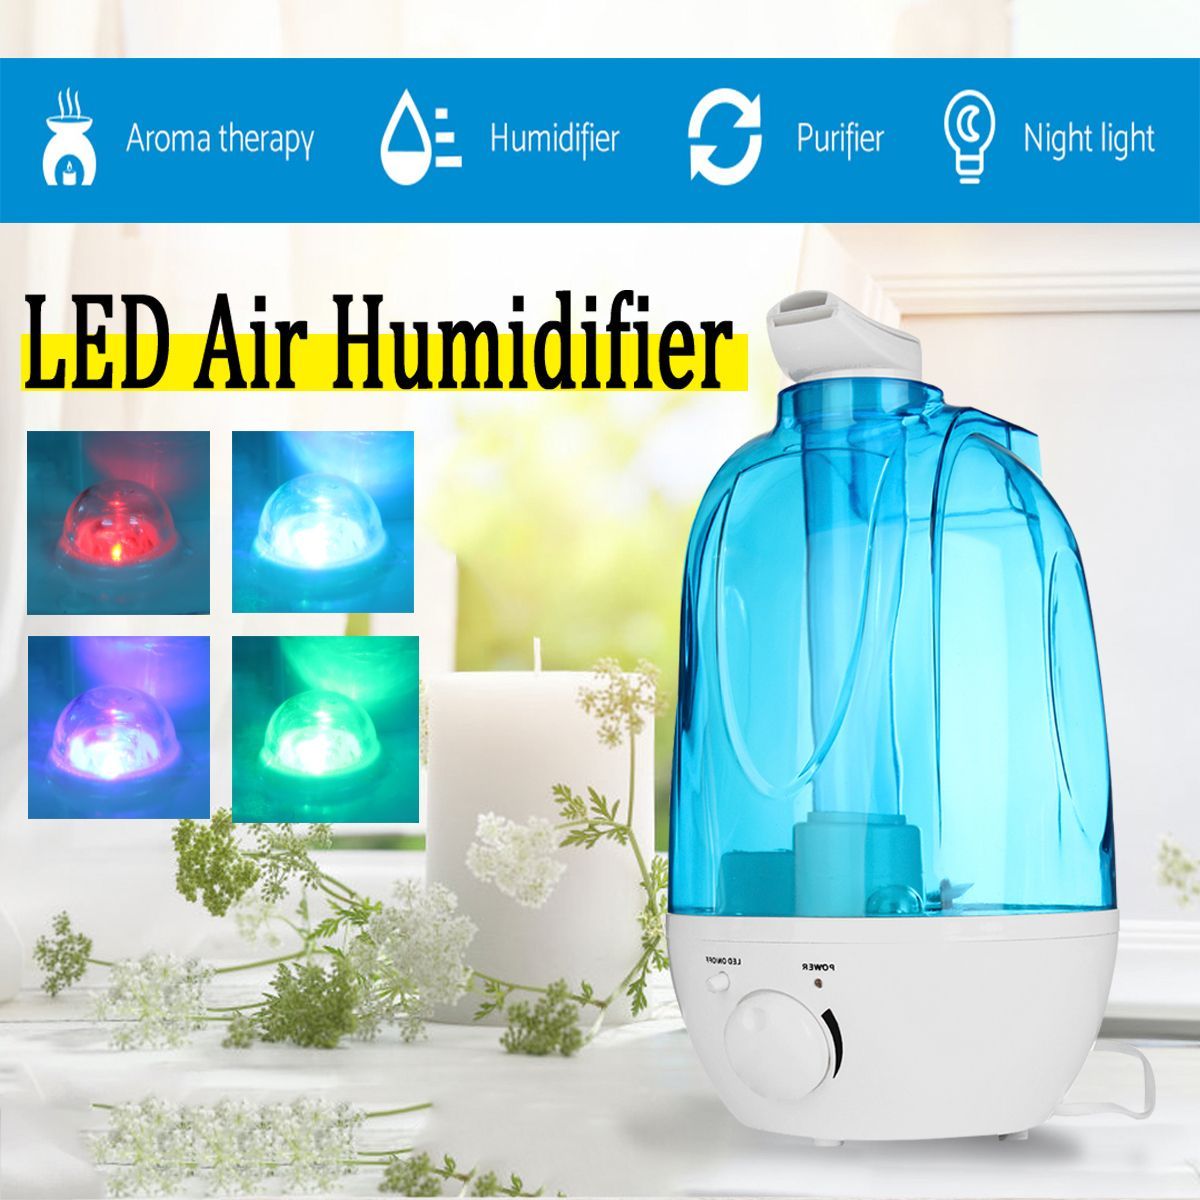 4L-Potable-LED-Ultrasonic-Humidifier-Atomiser-Air-Purifier-HomeOffice-20msup2-Room-1658521